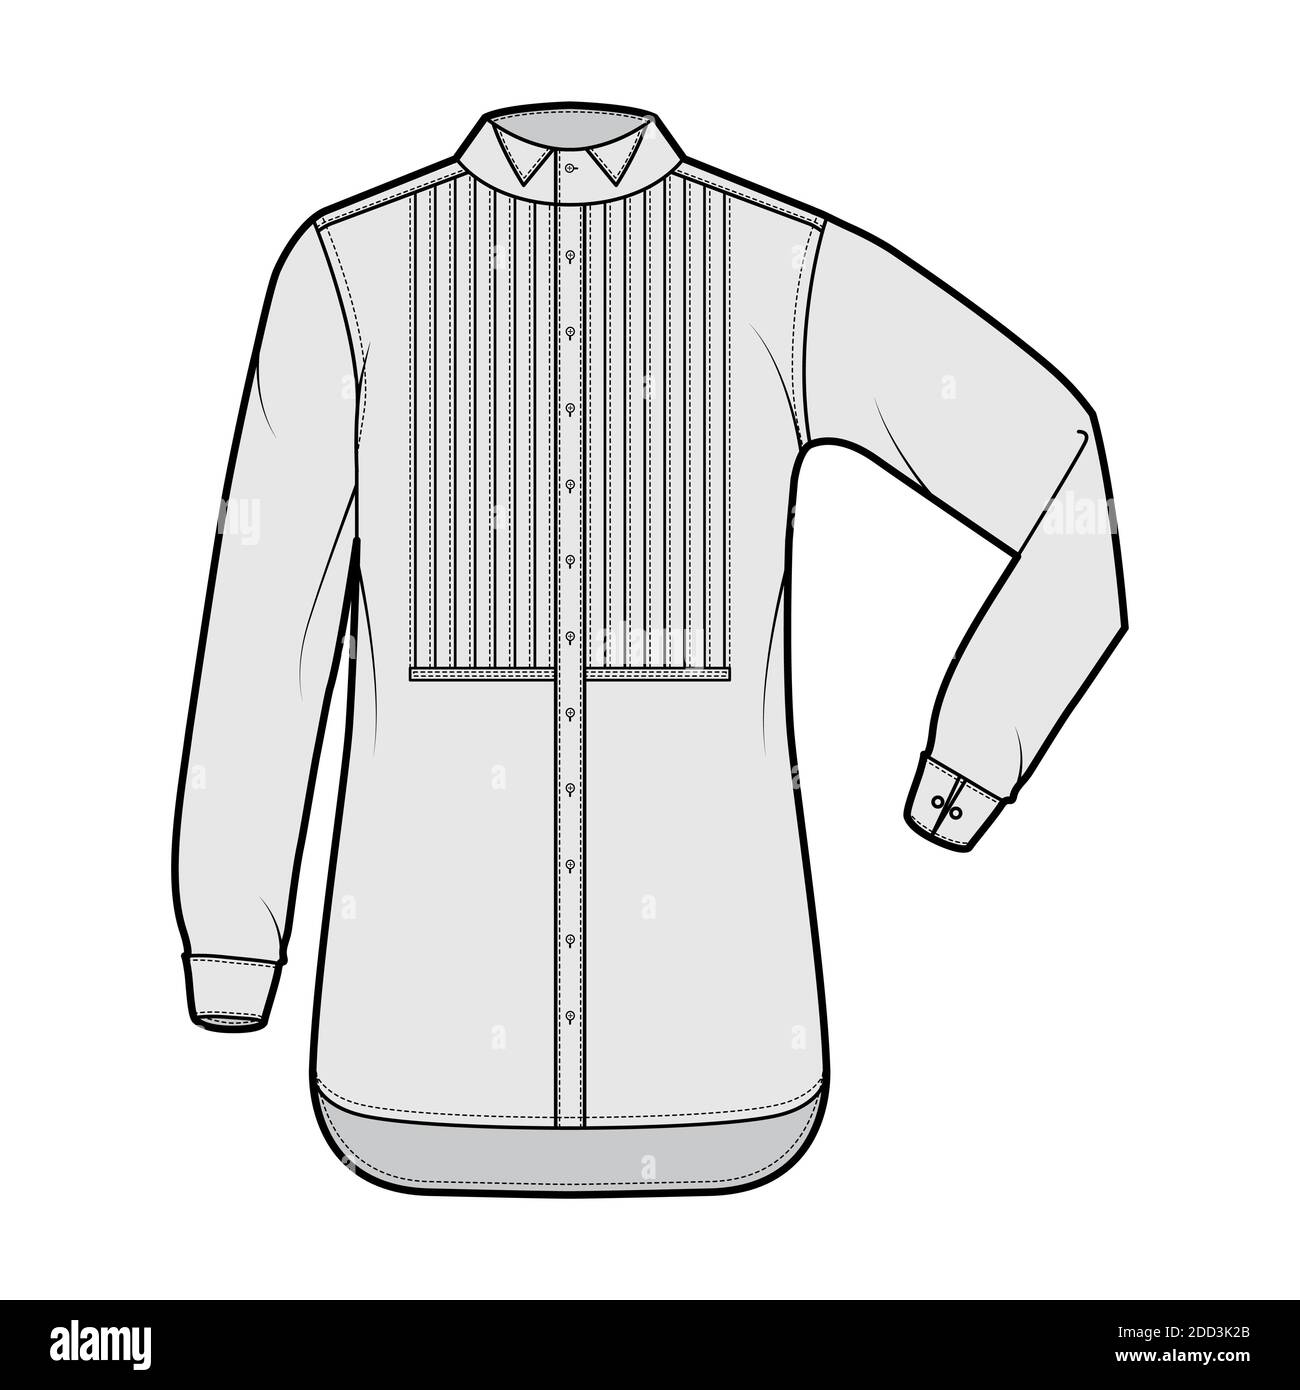 Shirt tuxedo dress technical fashion illustration with pleated pintucked bib, elbow fold long sleeves with french cuff, wing collar. Flat template front grey color. Women men unisex top CAD Stock Vector